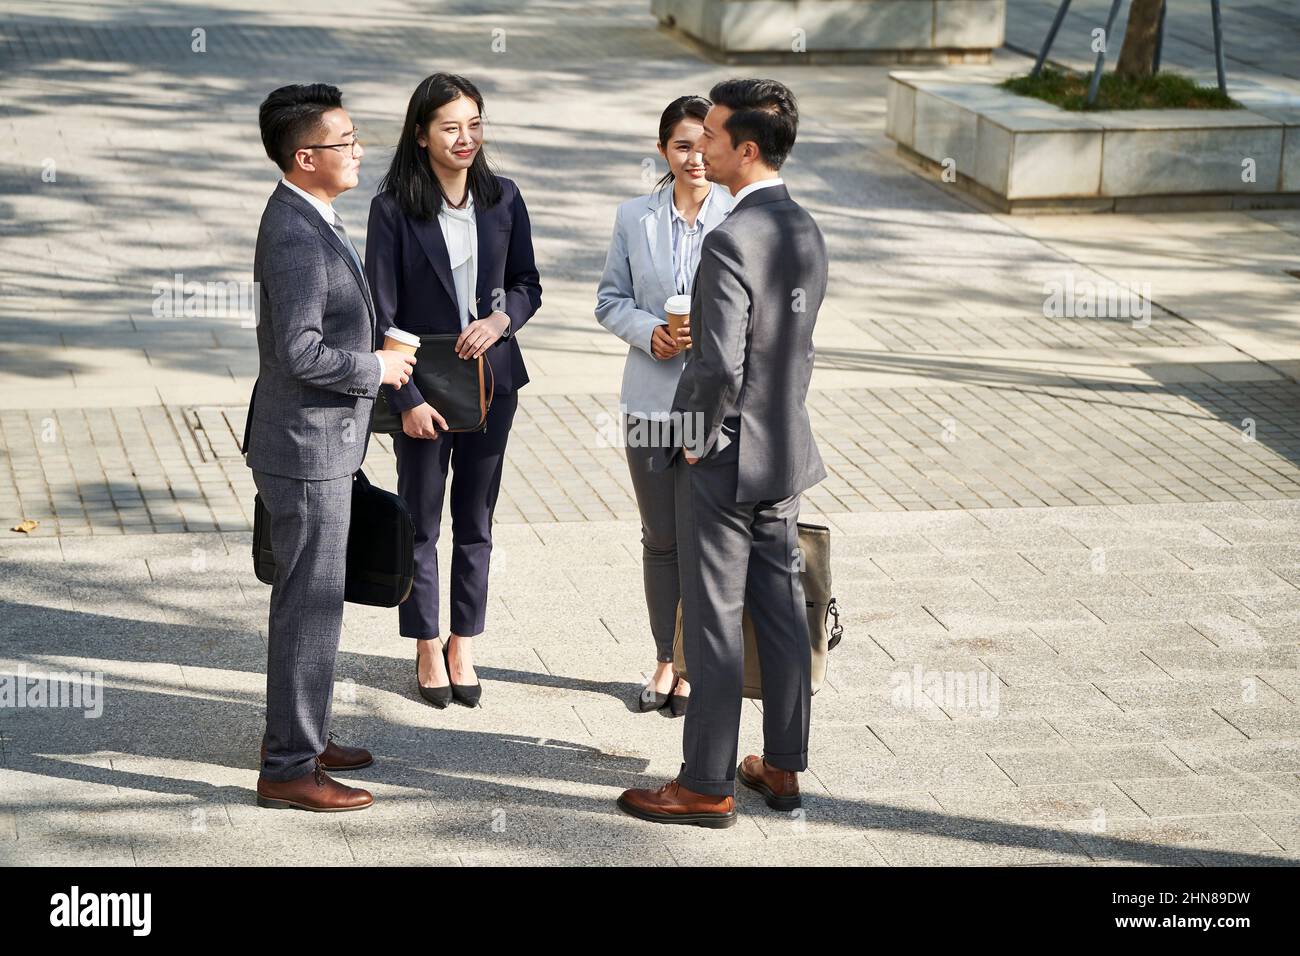 group of four young asian business people standing chatting outdoors on street Stock Photo